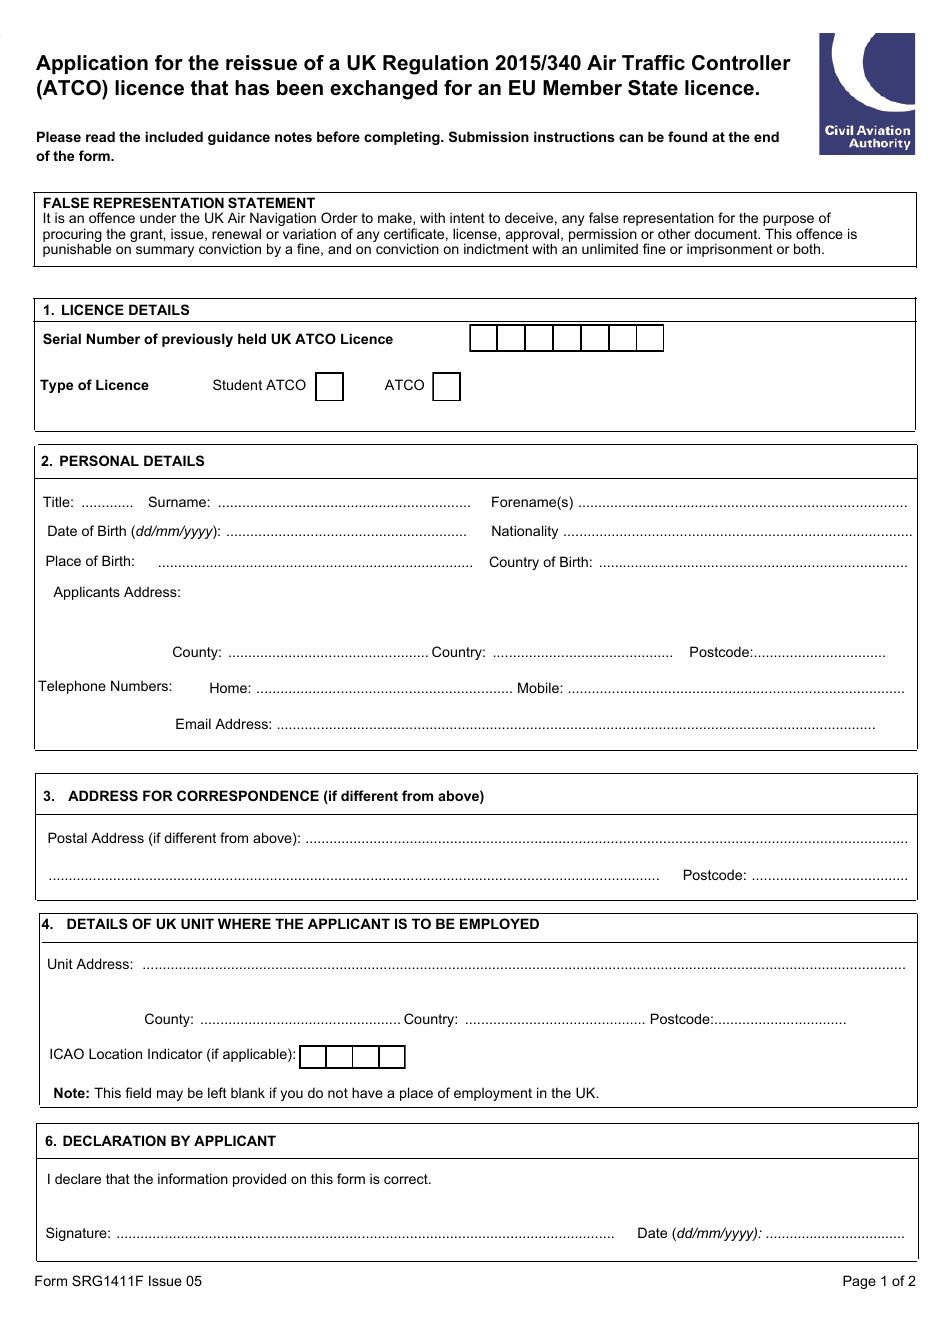 Form SRG1411F Application for the Reissue of a UK Regulation 2015 / 340 Air Traffic Controller (Atco) Licence That Has Been Exchanged for an Eu Member State Licence - United Kingdom, Page 1